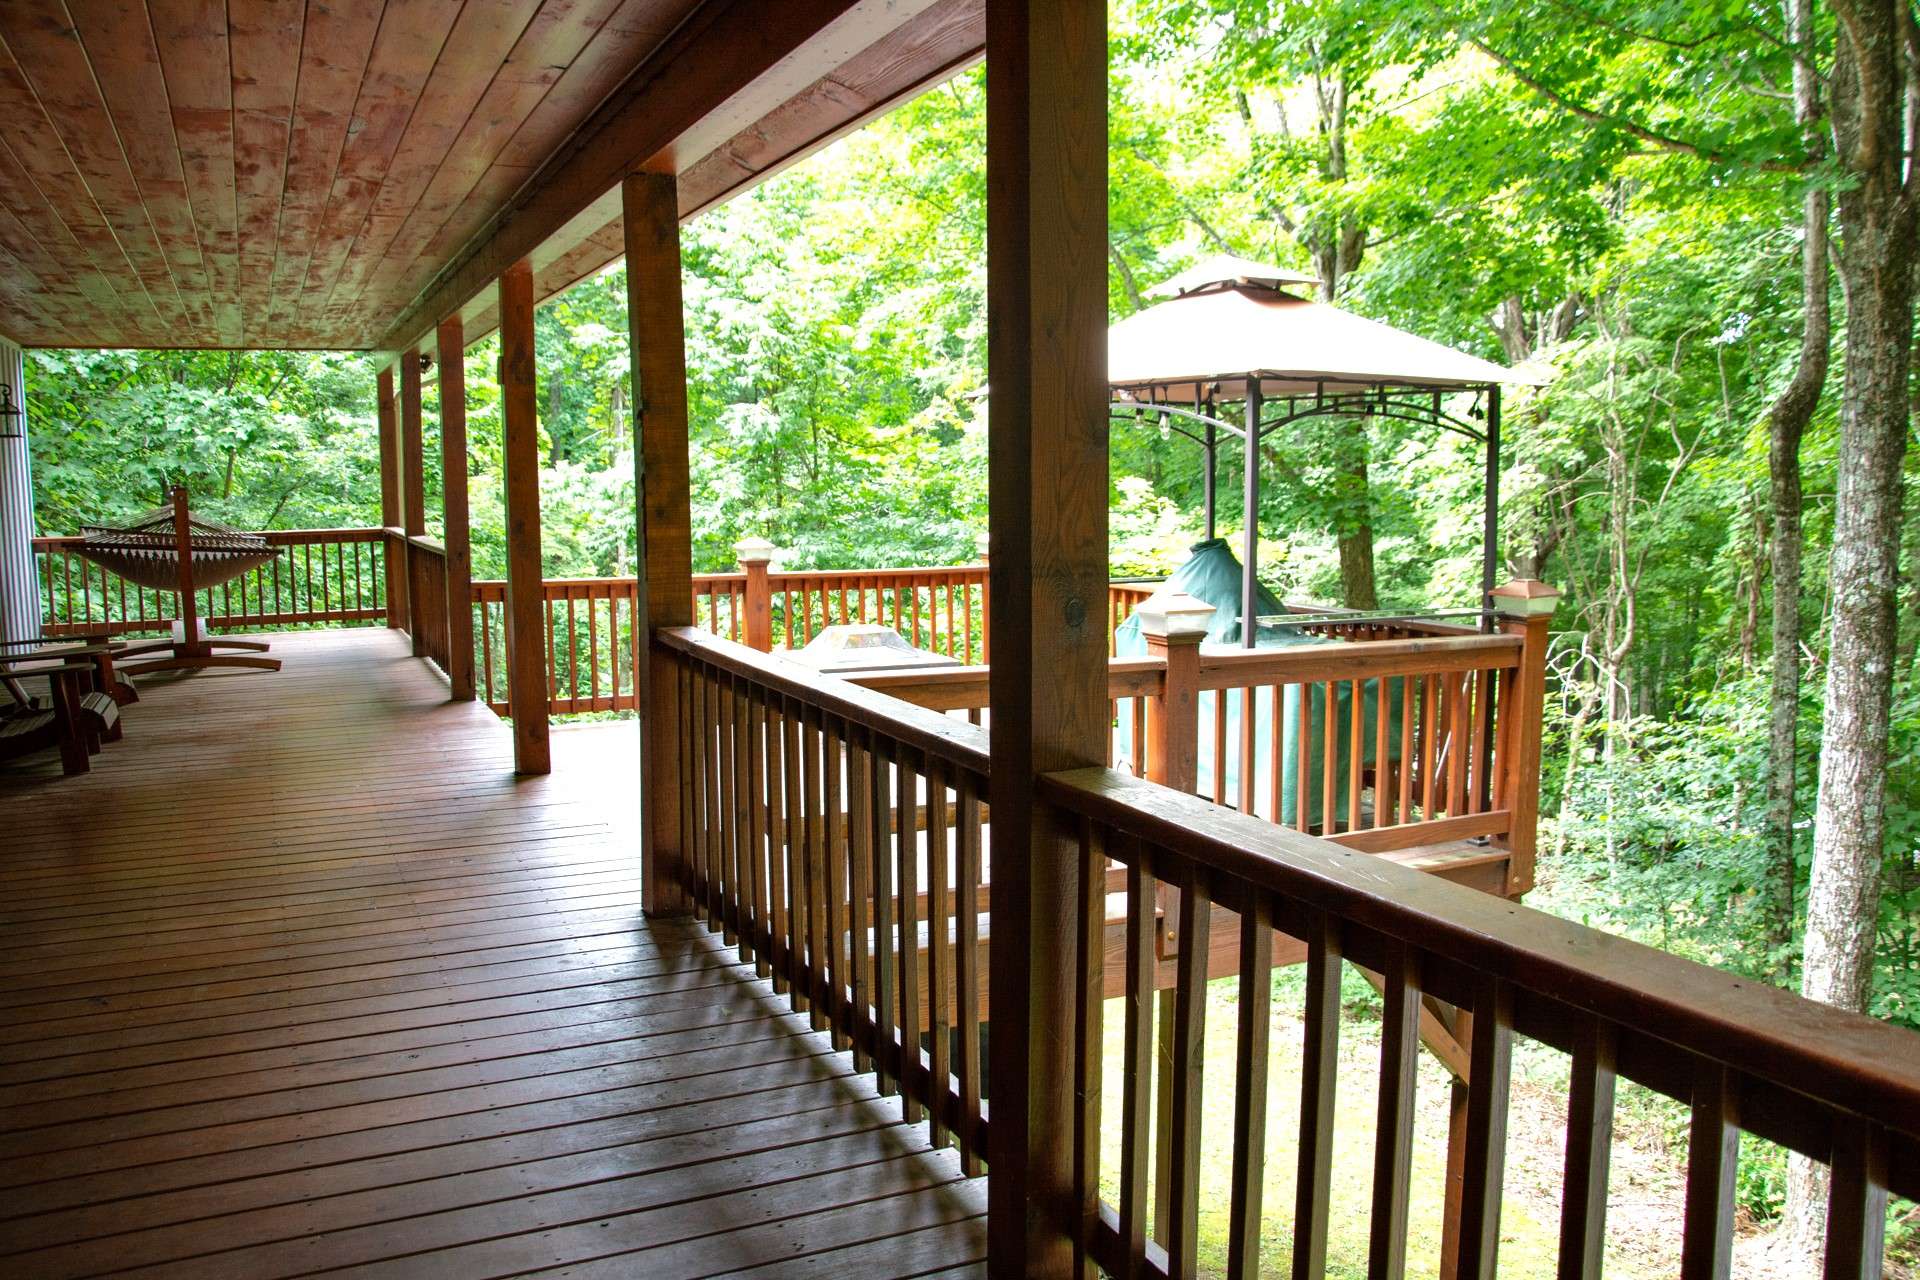 Enjoy one level living and a full length covered back deck where you can spend quality time with Nature.